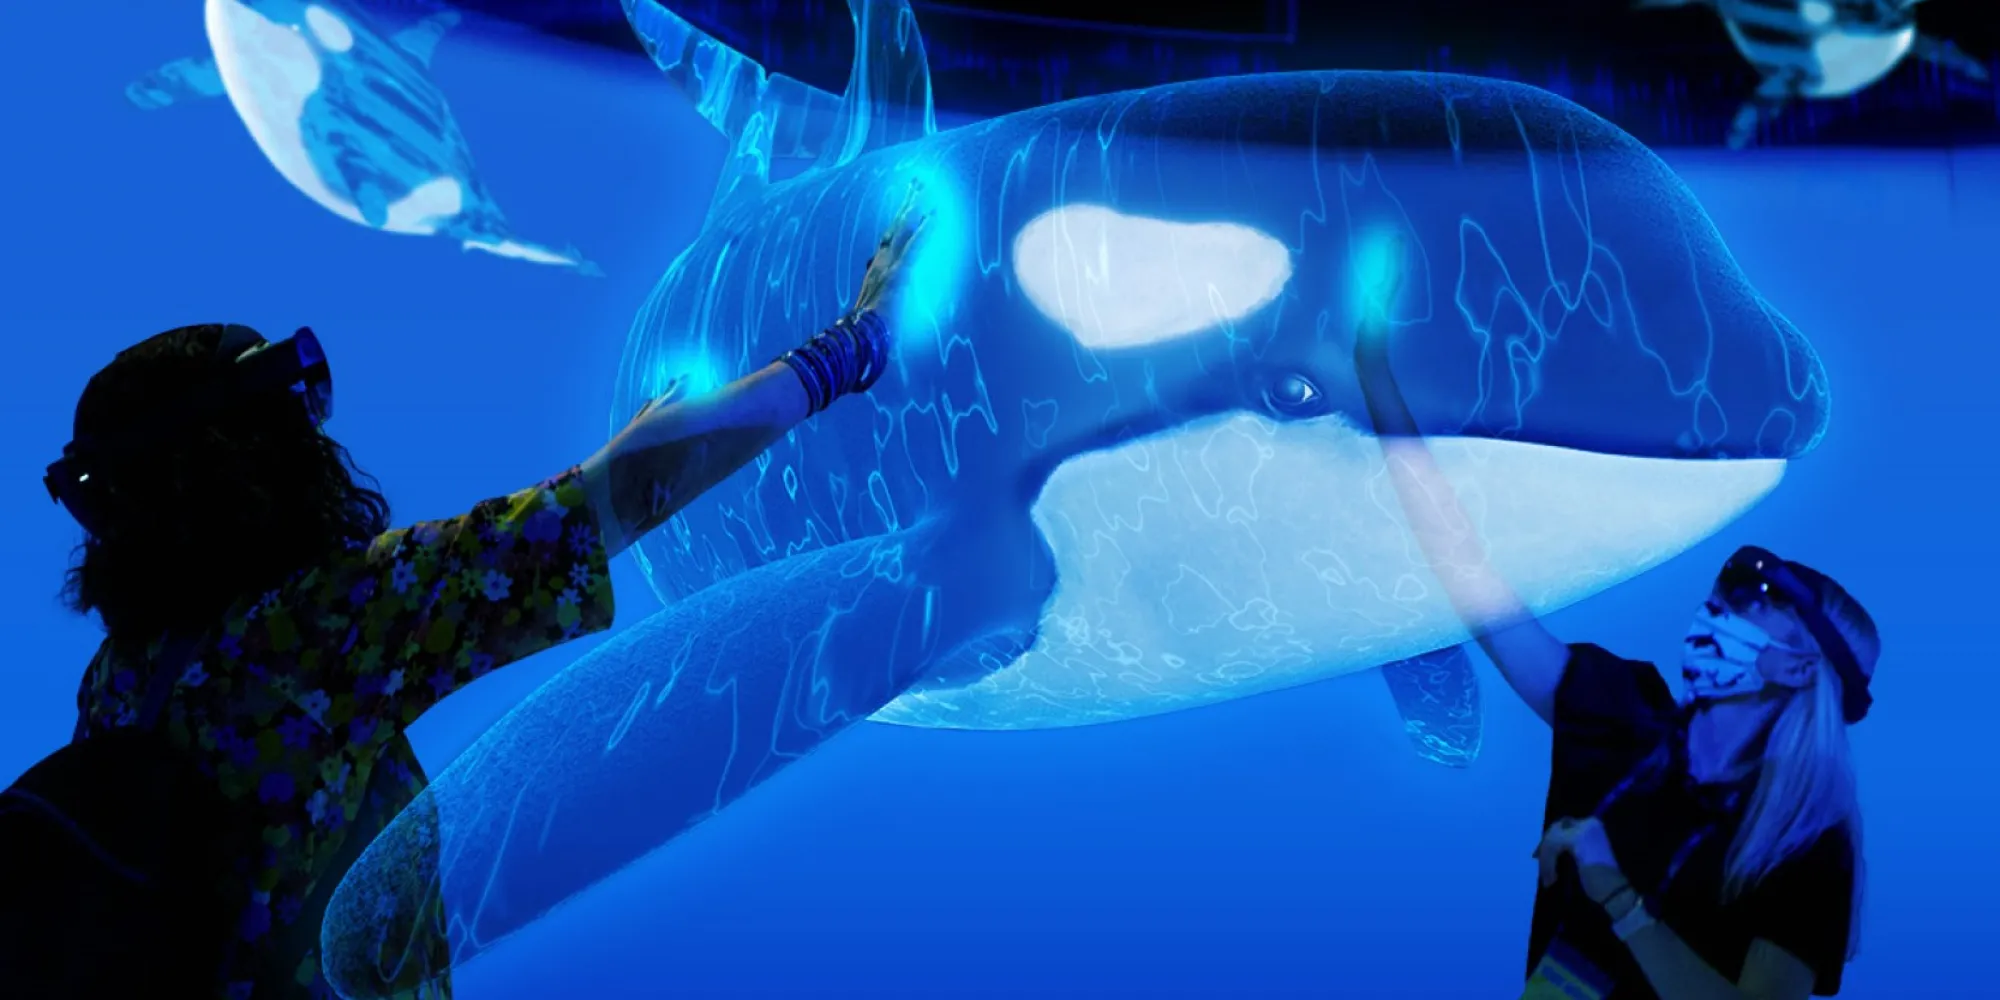 a digital projection of an orca what with a person reaching out to touch it. mostly blue tones 